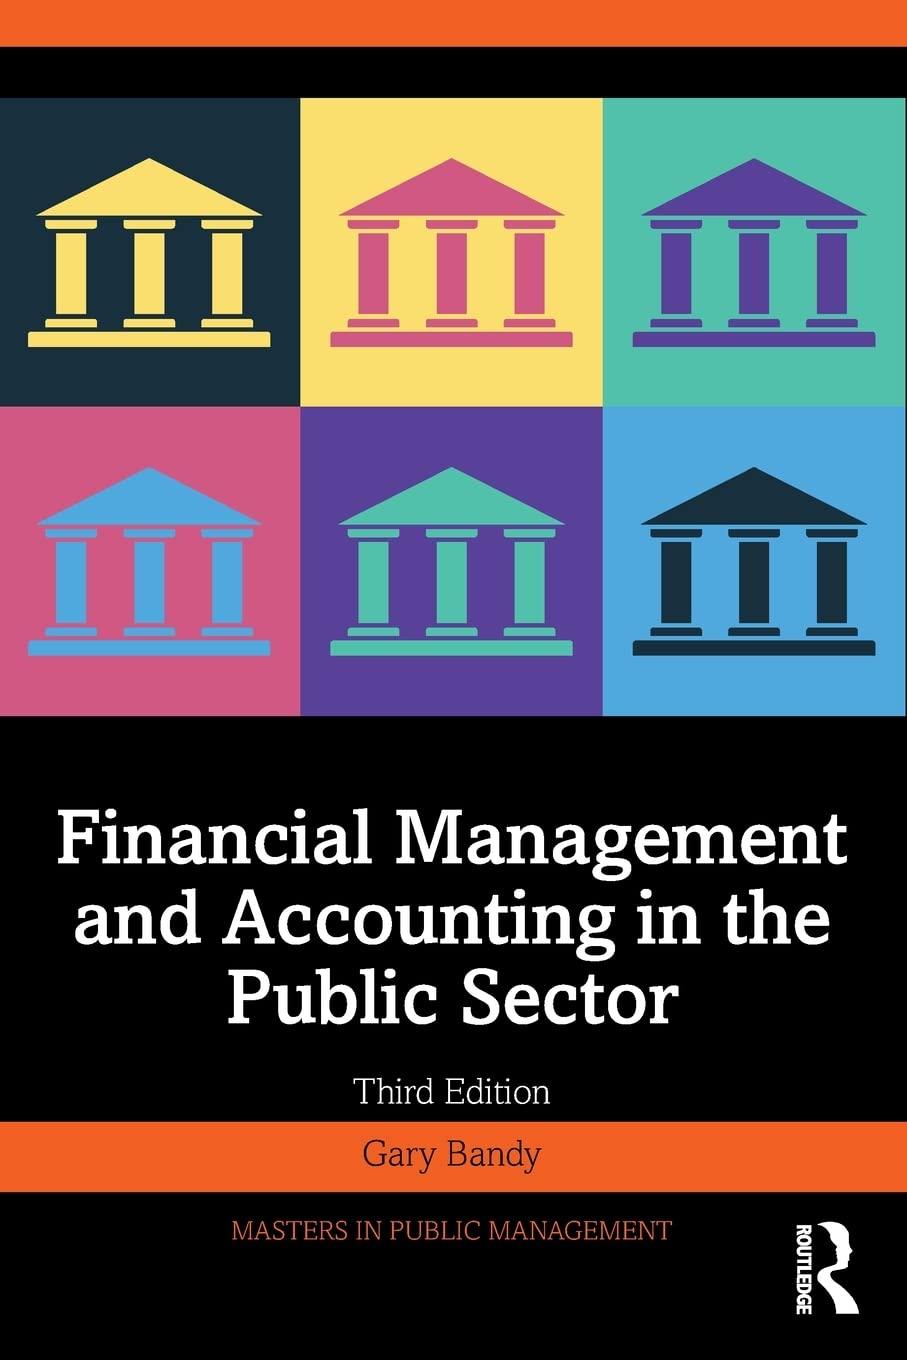 financial management and accounting in the public sector 3rd edition gary bandy 1032157305, 978-1032157306